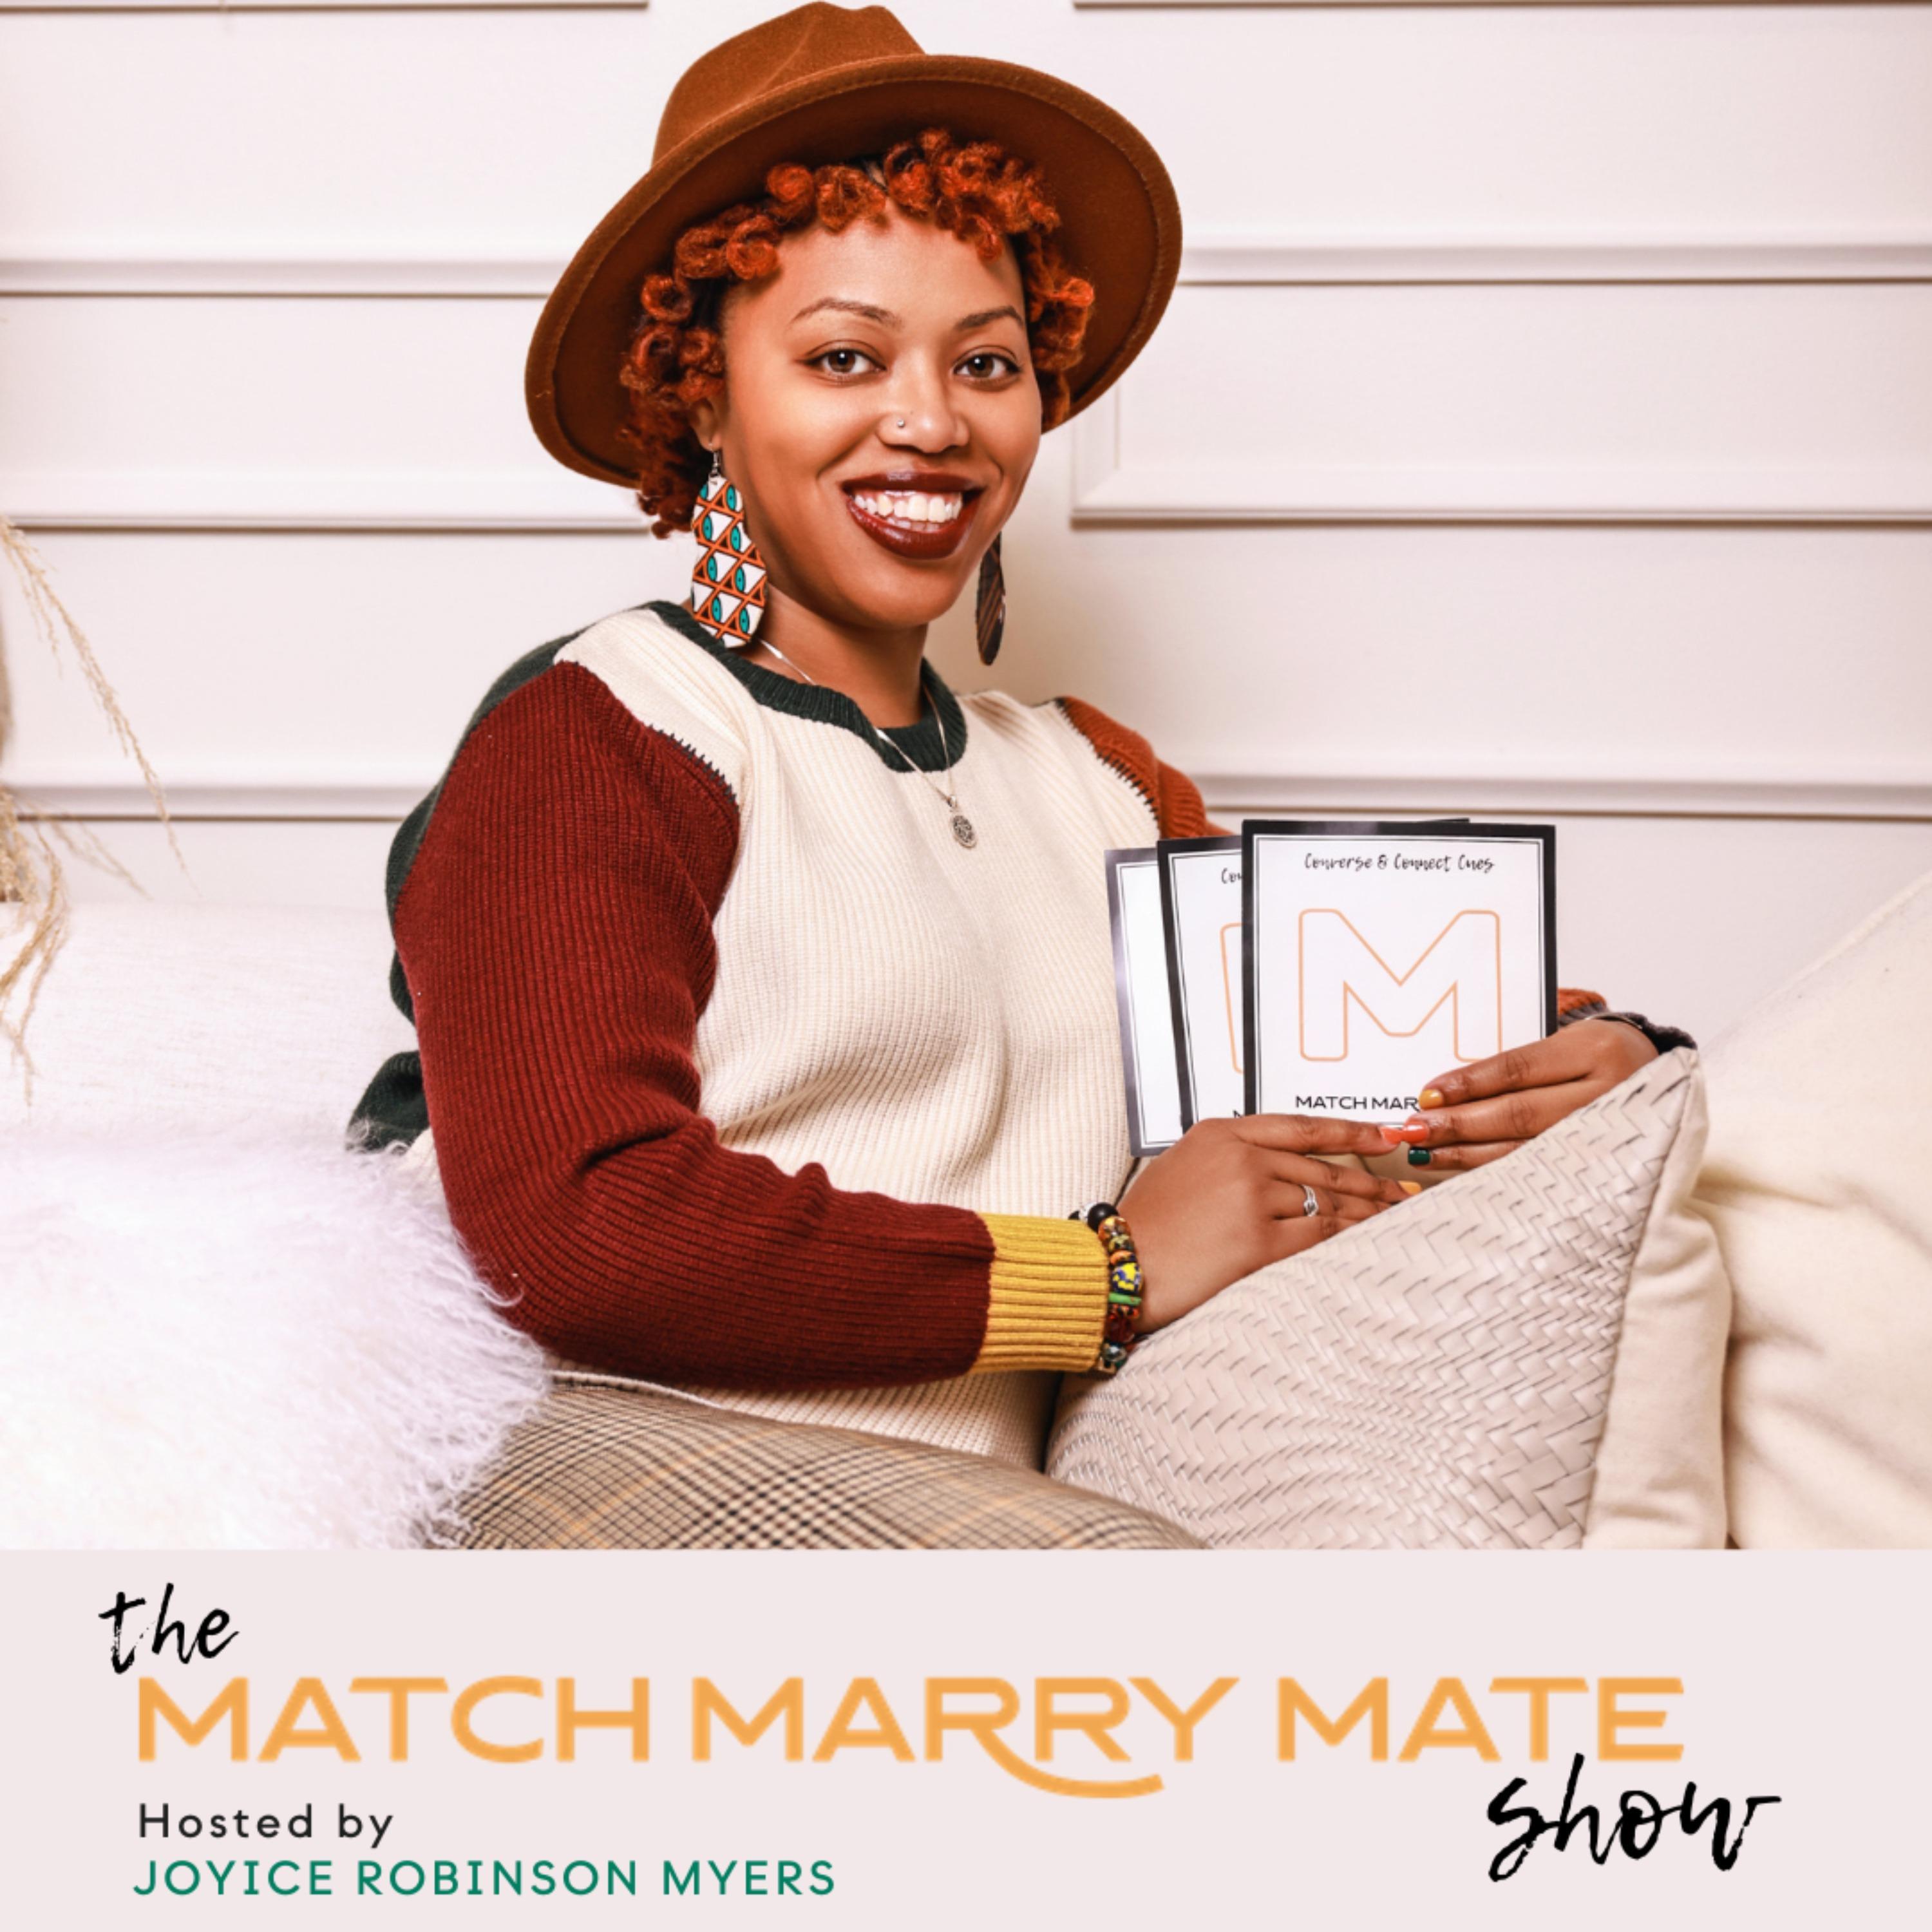 The Match Marry Mate™ Show